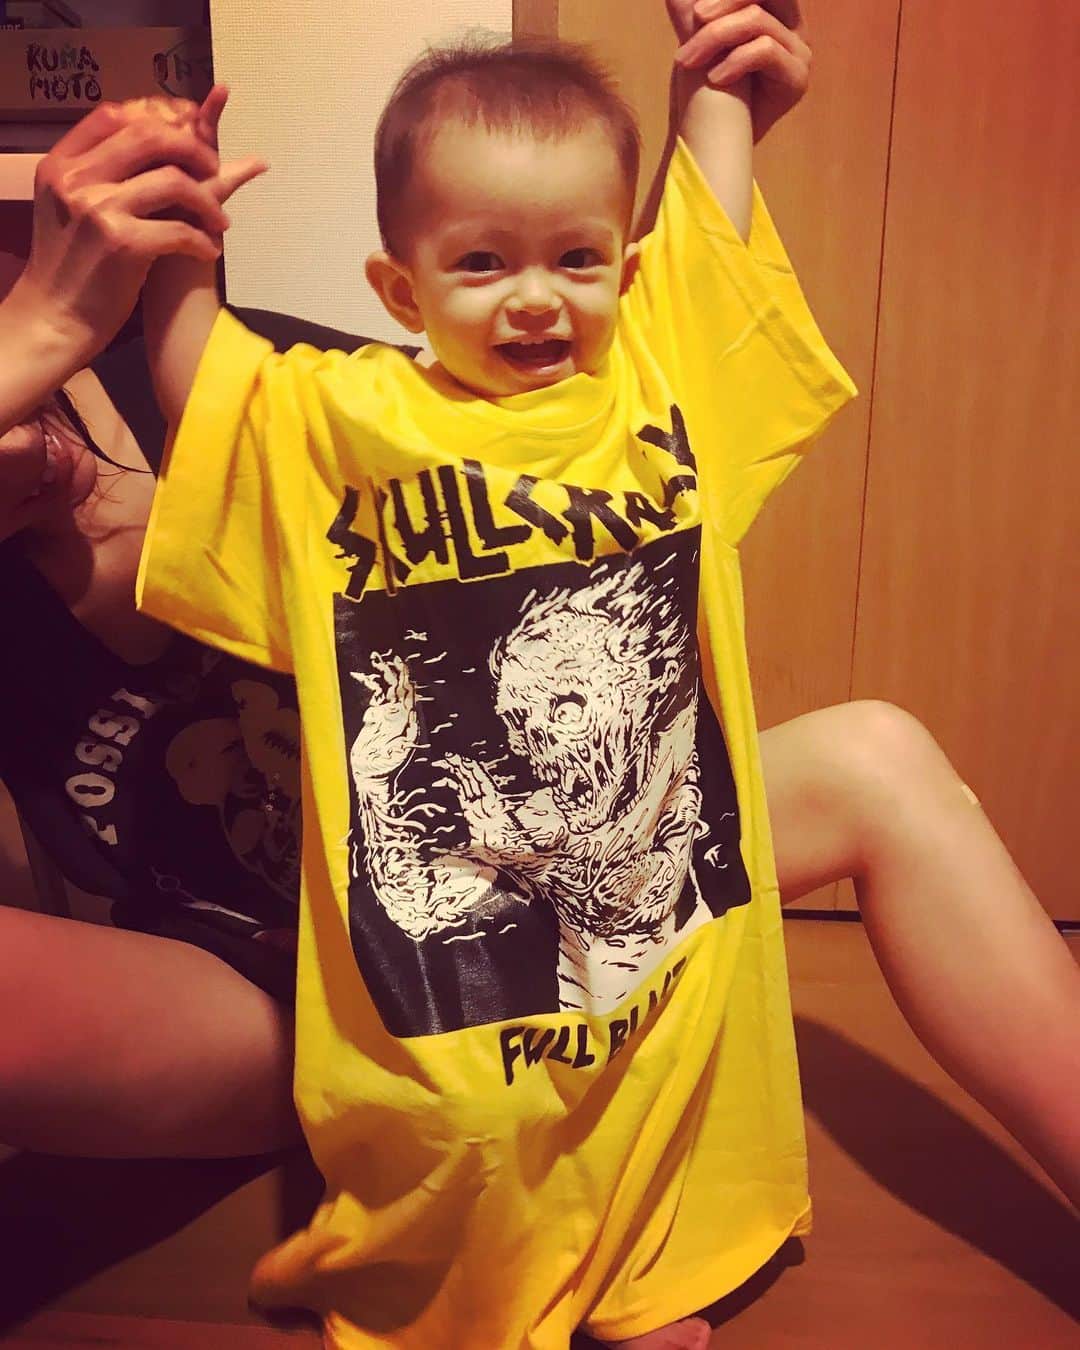 Adamのインスタグラム：「She listened to @gatecreeper in the womb and now she’s borrowing my new Skullcrack shirt. My little moshmachine. @skullcrackhc  #skullcrack #thrash #california #gatecreeper #mosh #baby #cute #toomanyhashtags」